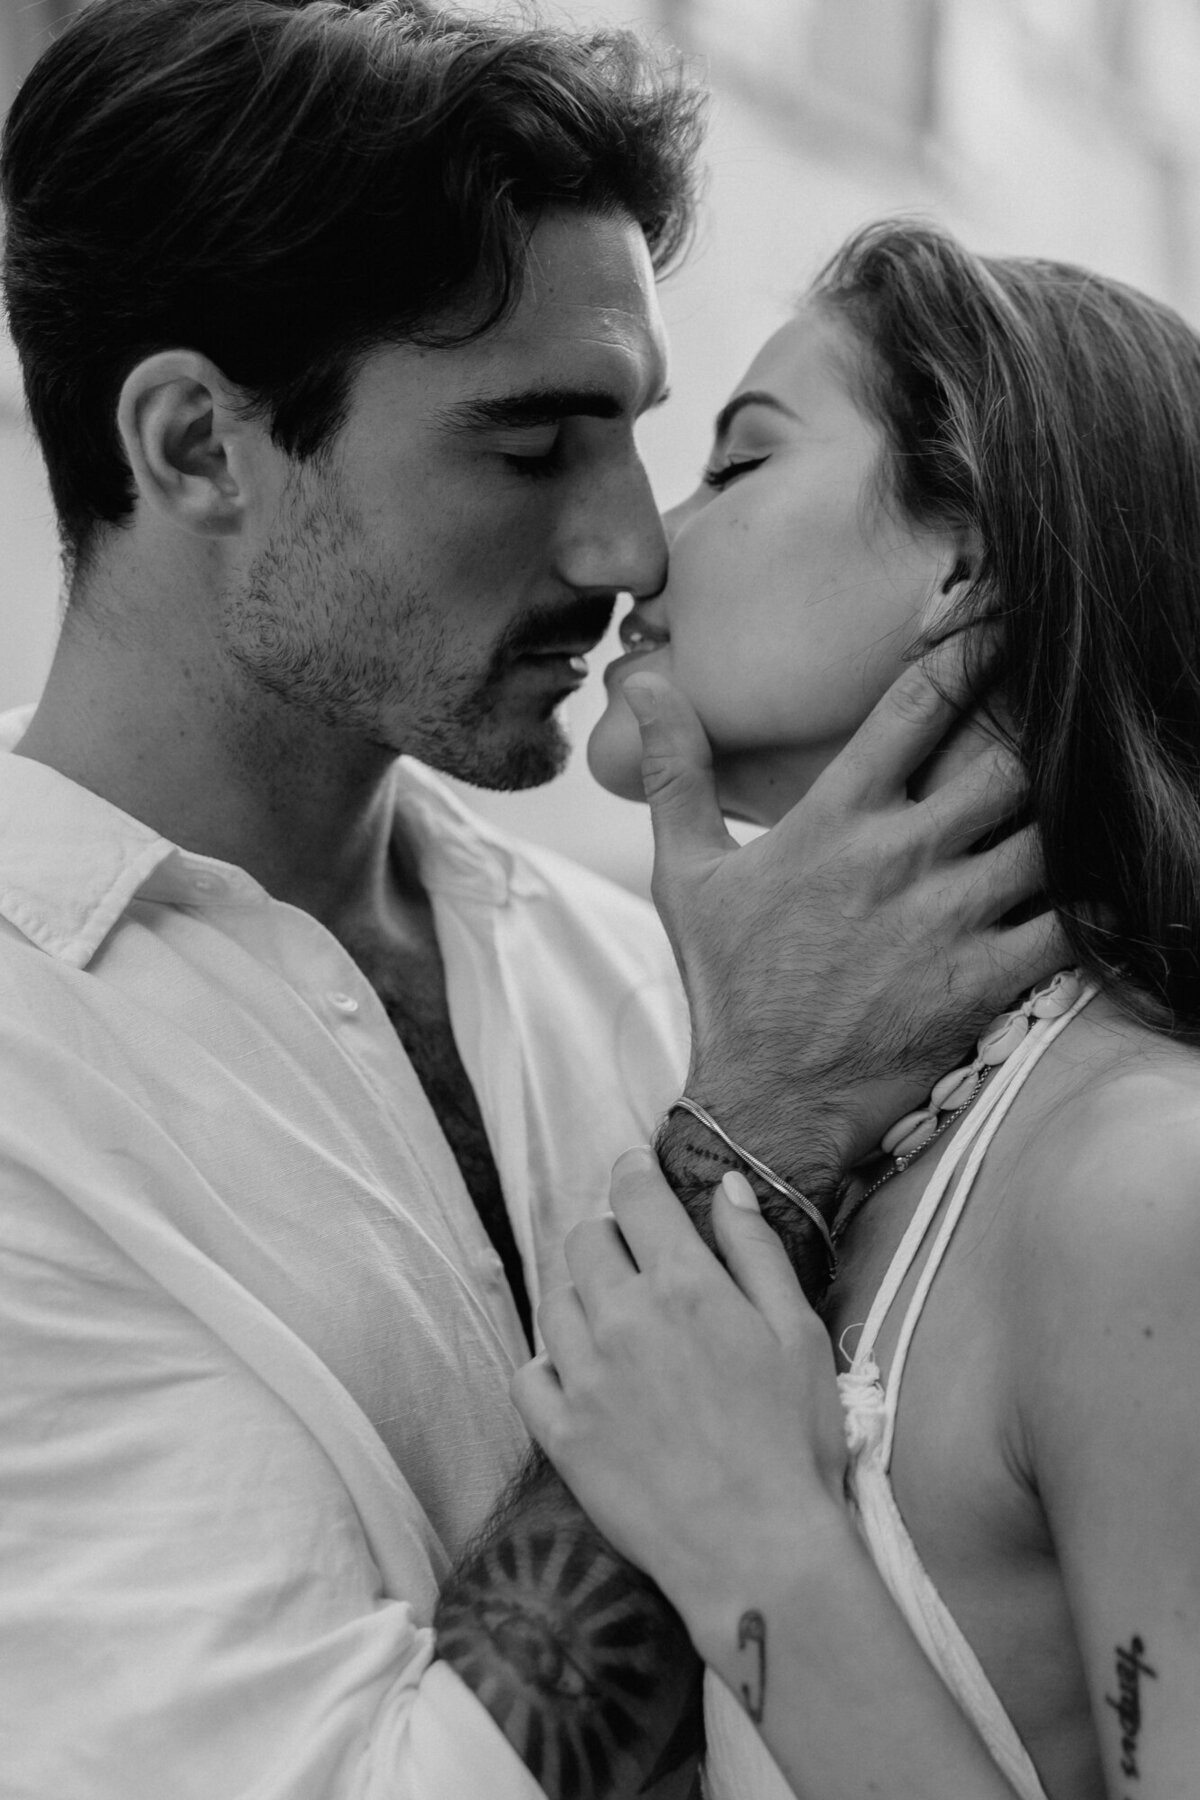 Black and white photo of couple upclose about to kiss with his hand on her neck.